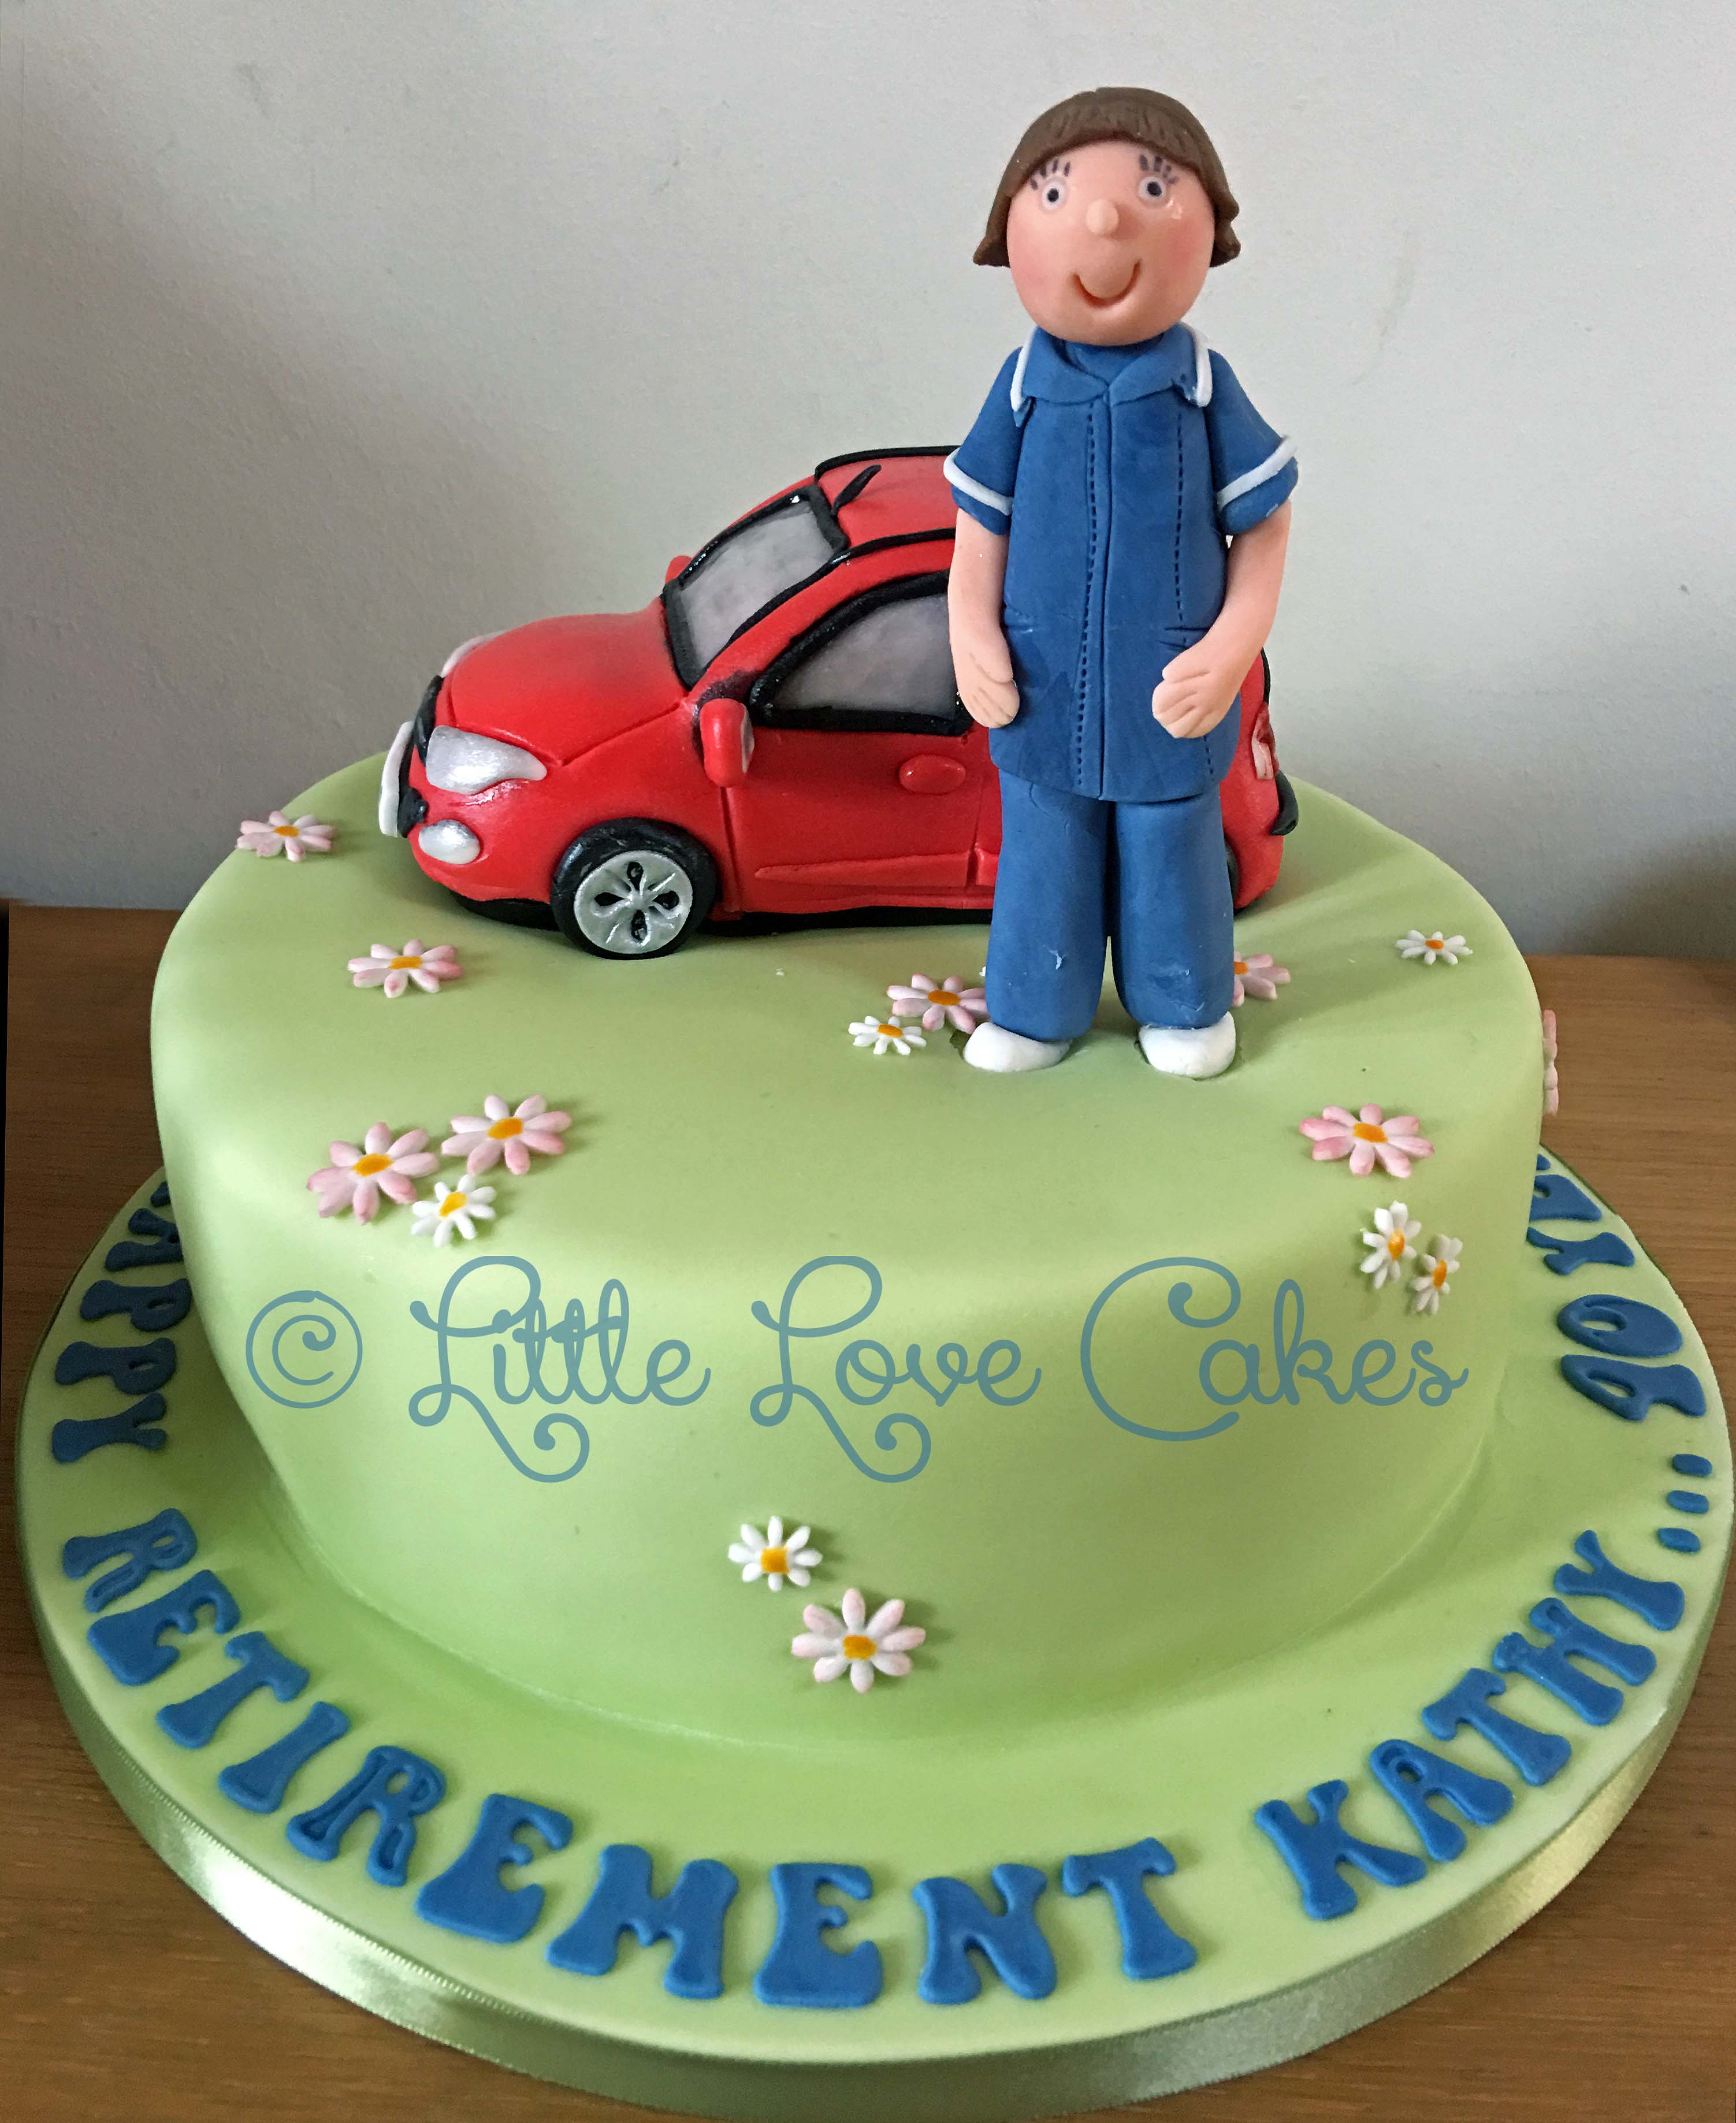 Retiring nurse and her red fiat cake